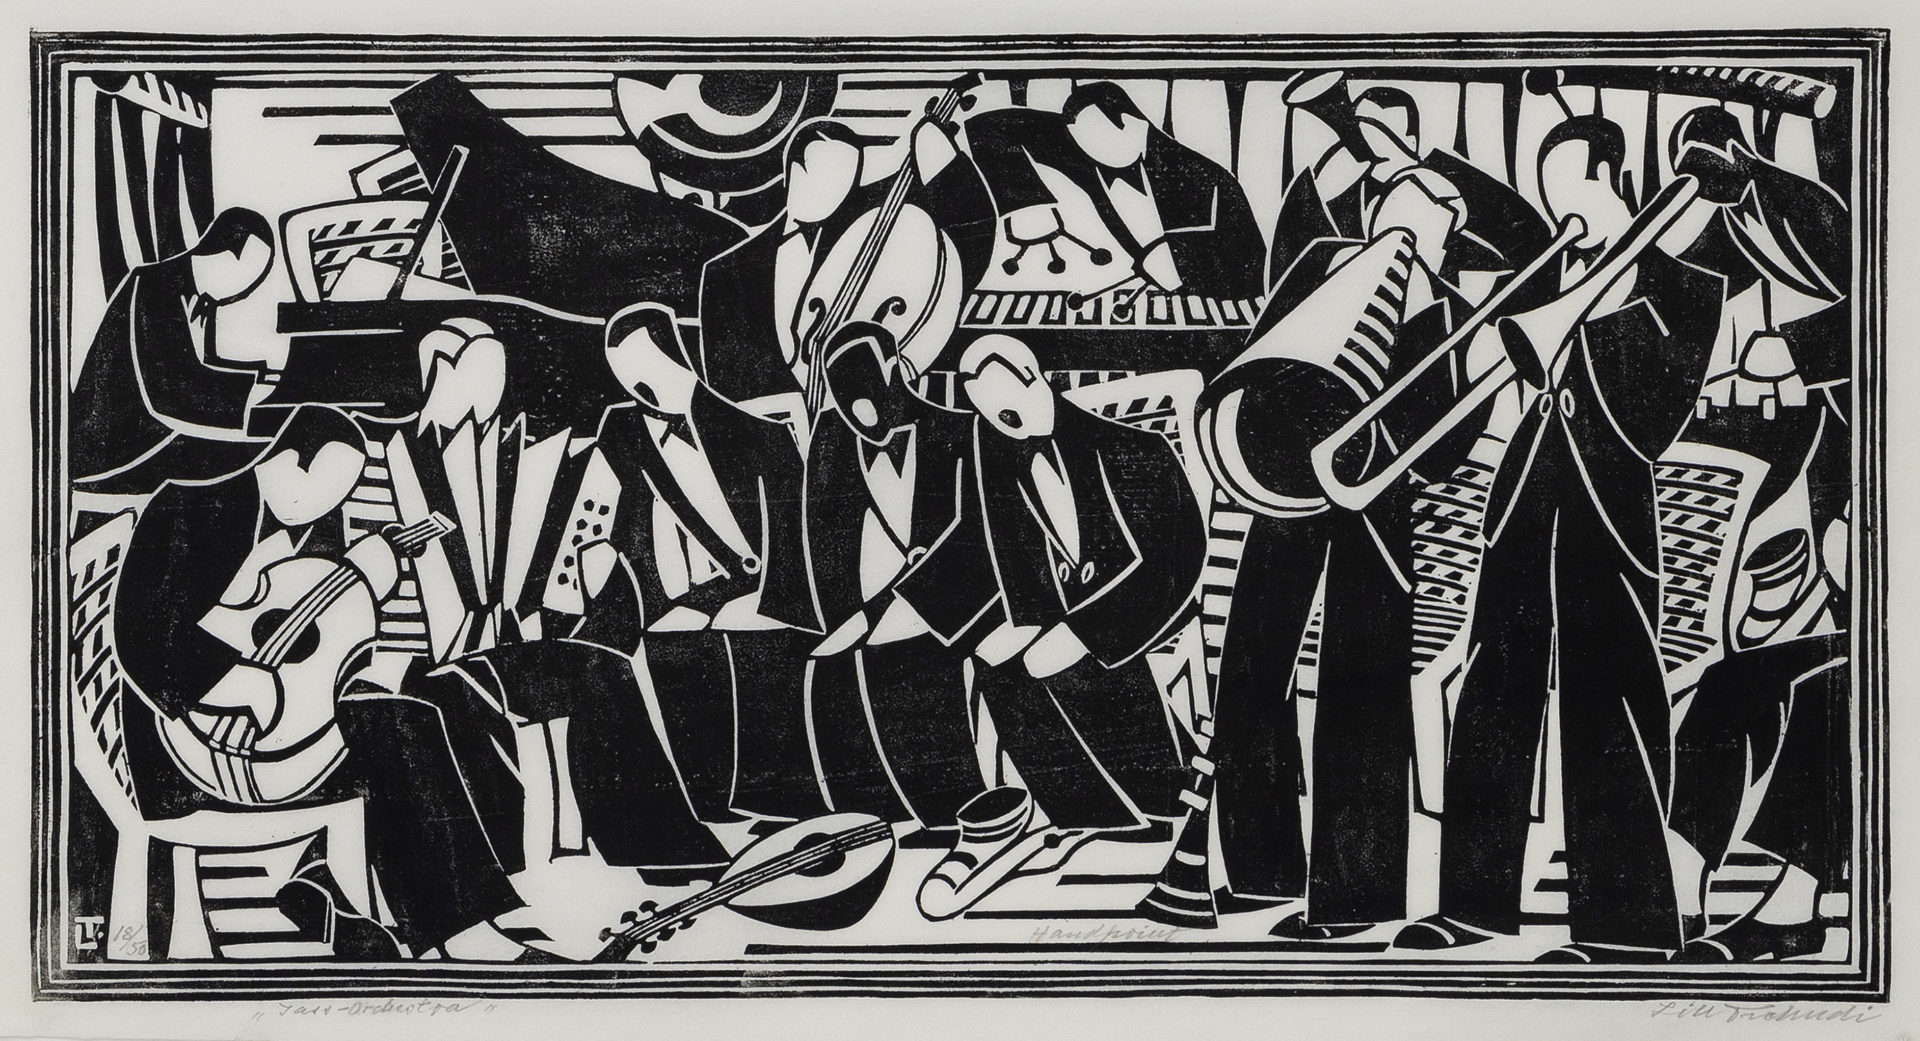 Lill Tschudi Jazz Orchestra, c. 1935 Linocut on Japon paper Image Dimensions: 10 5/8 x 20 3/8 inches (27 x 51.8 cm) Paper Dimensions: 12 x 24 1/2 inches (30.5 x 62.2 cm) Edition of 50